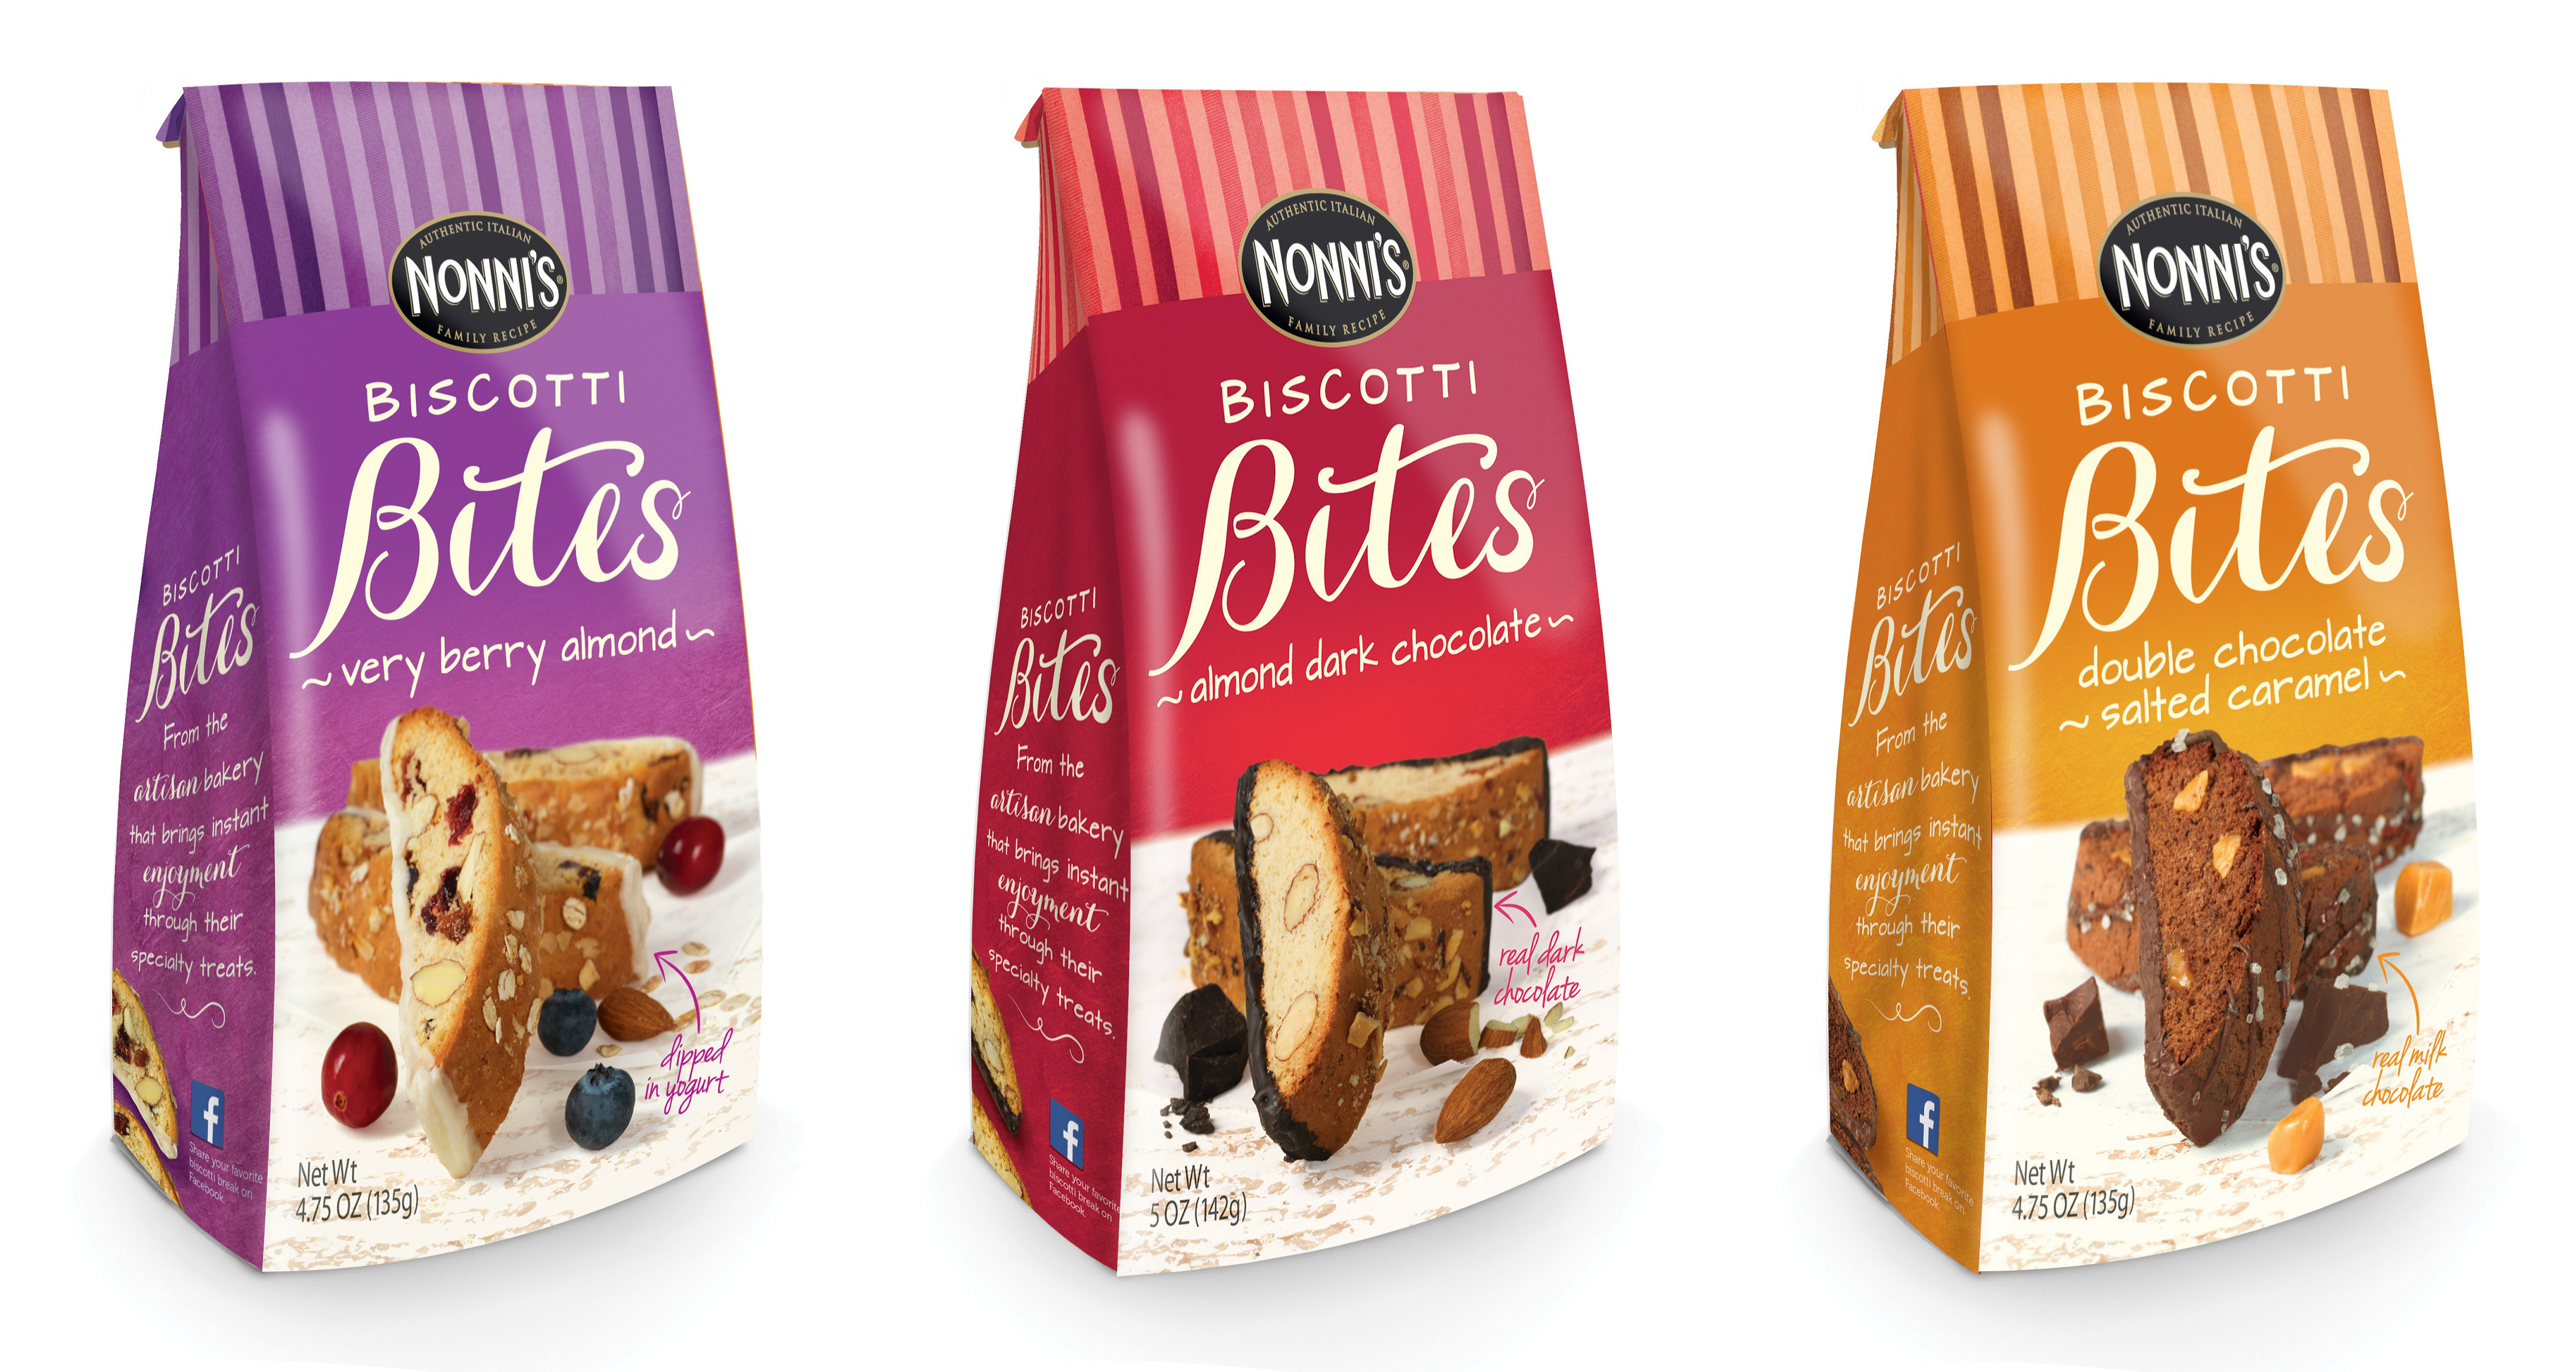 GIVEAWAY: Win three packages of Nonni’s Biscotti Bites!